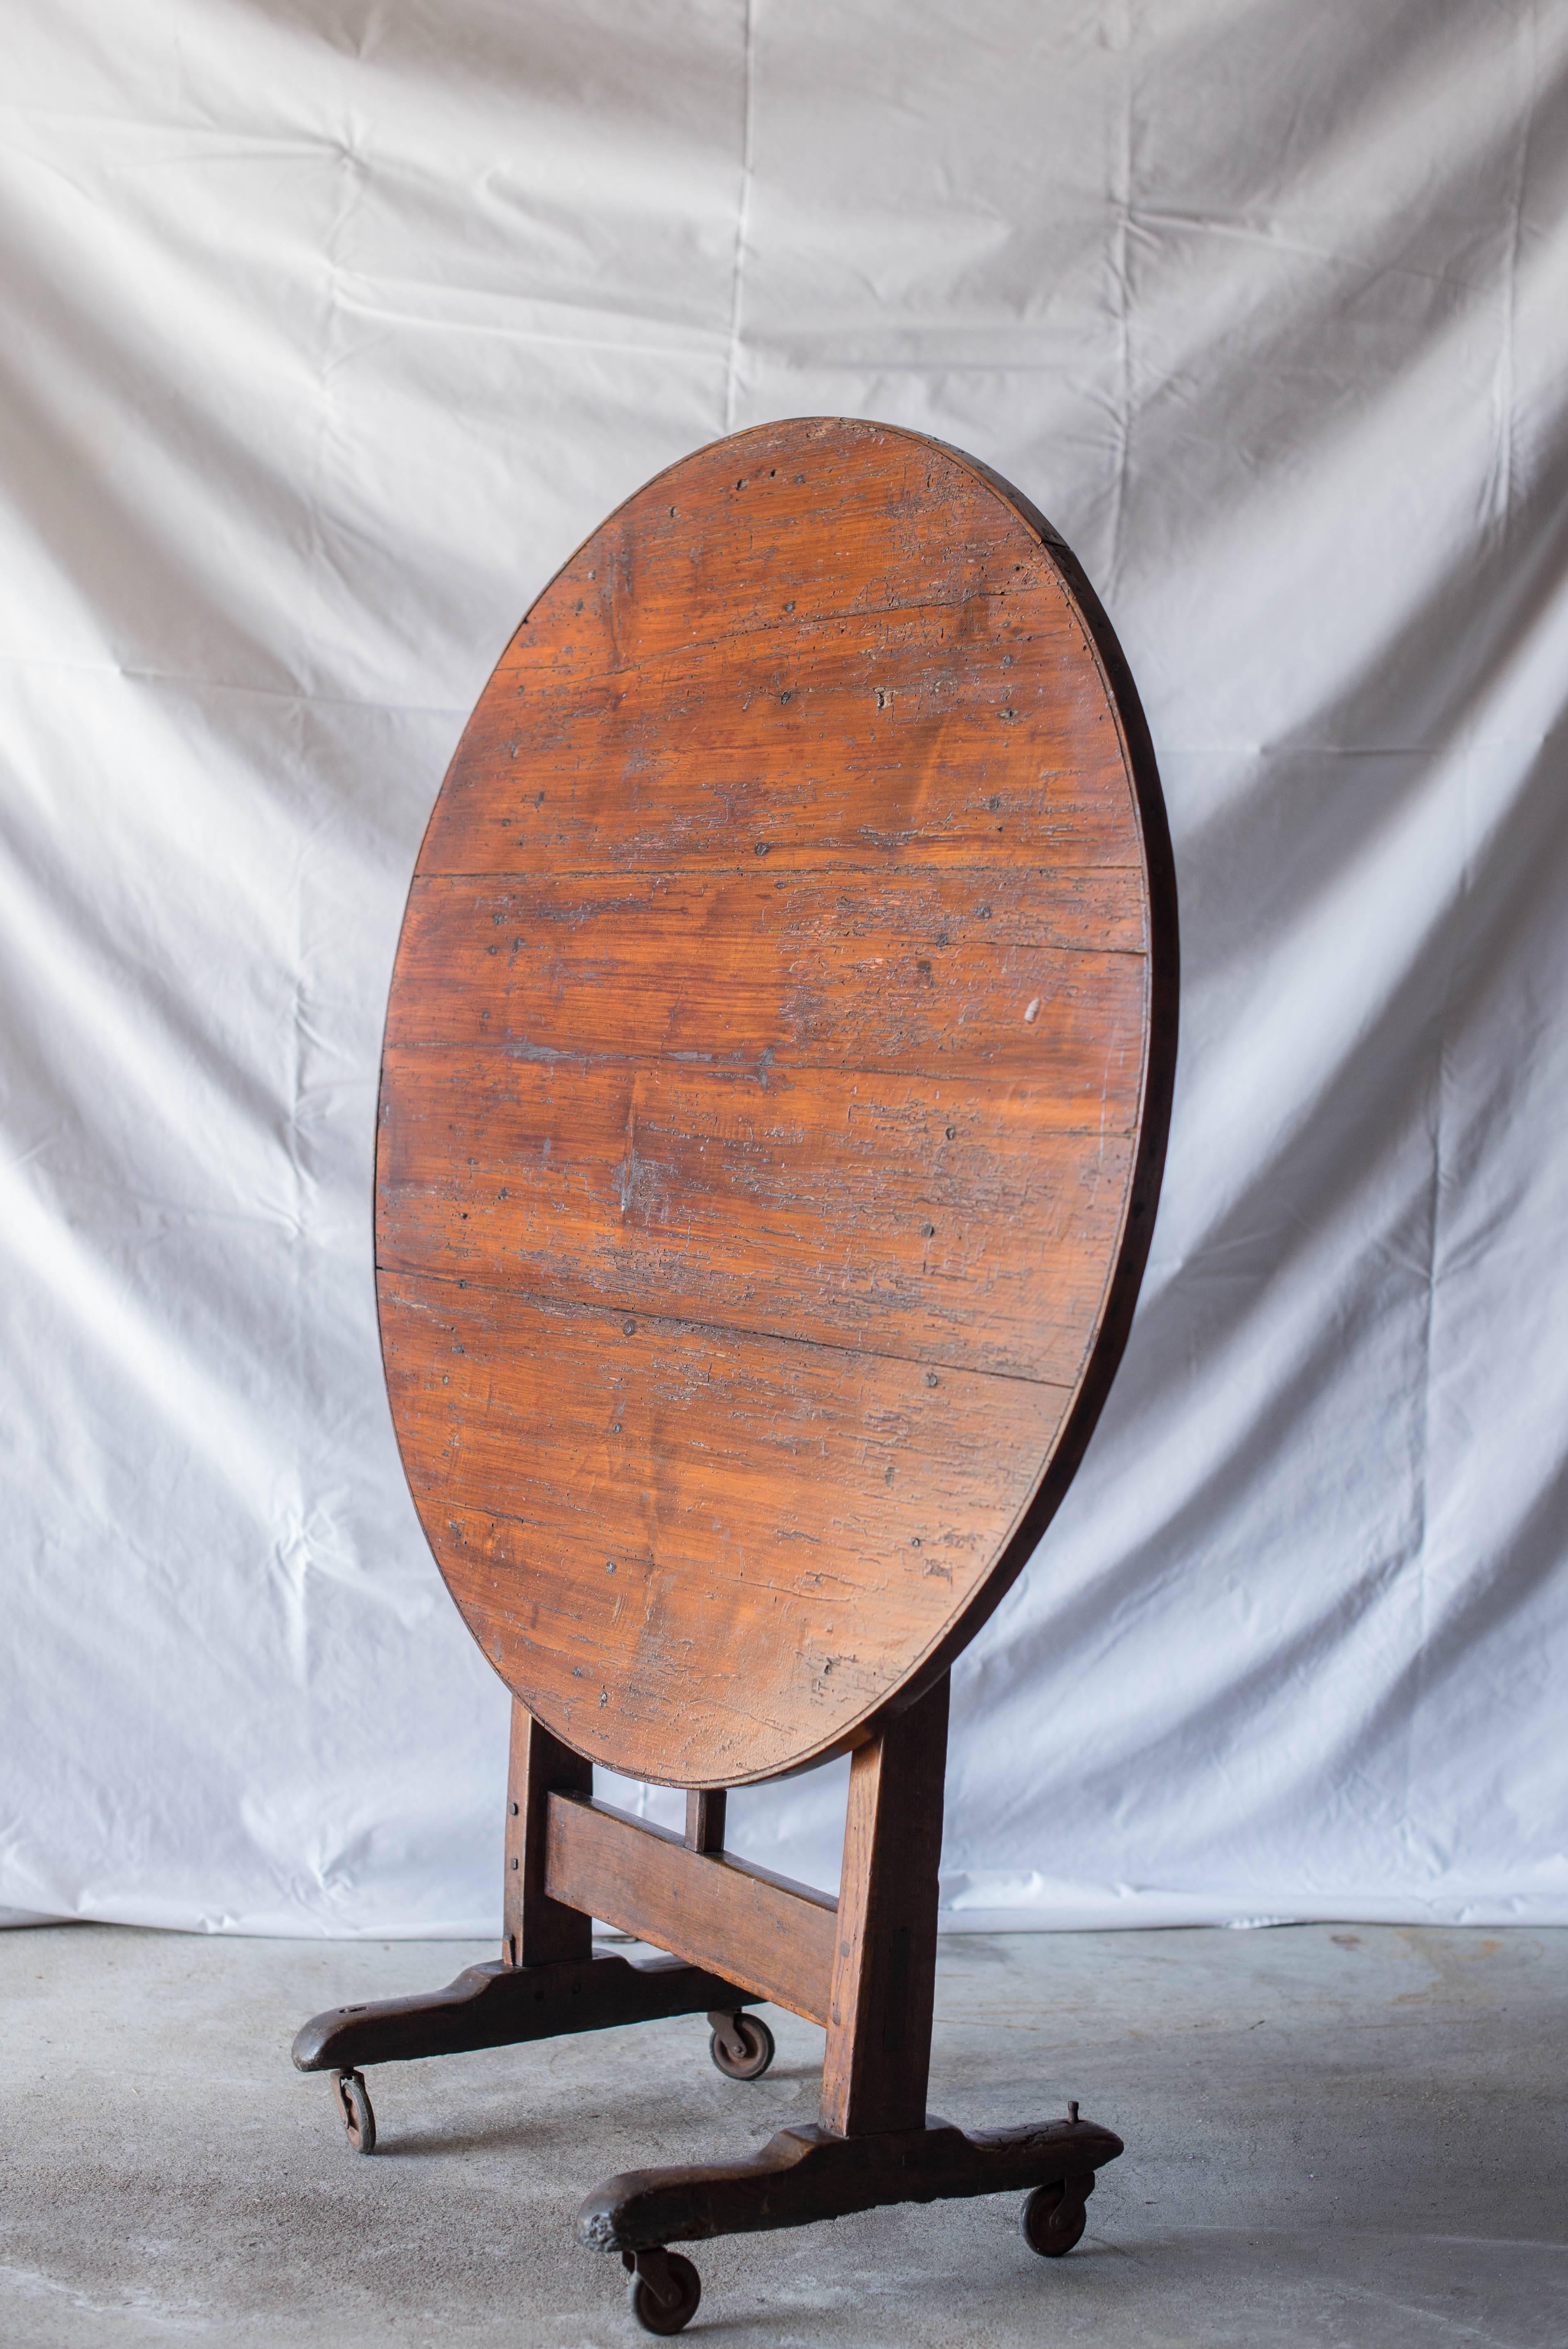 This tilt-top wine tasting table has an oak base and bentwood banding around the top. The top does not appear to be oak and can be positioned vertically for storage against a wall. The base has sledge feet and sits on casters.